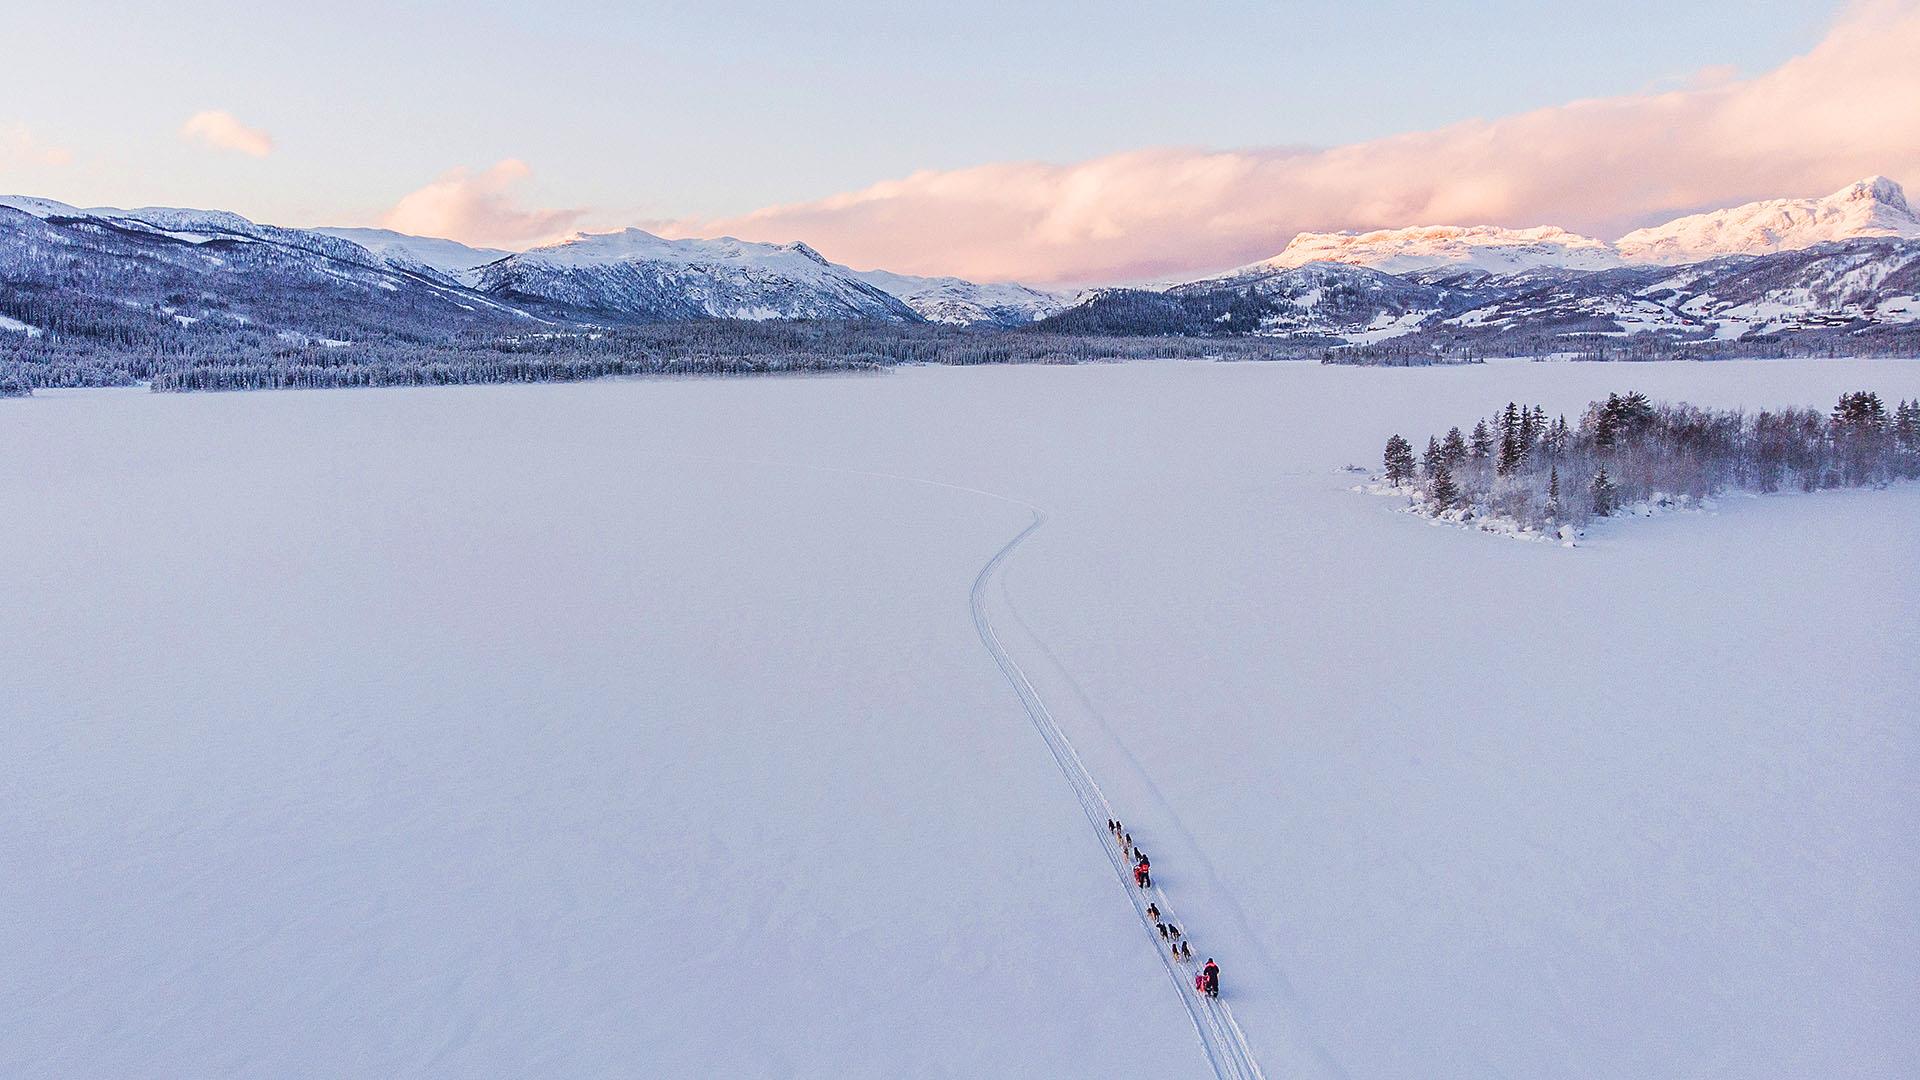 Aerial photo of two dog sledding teams on a lage snow-covered lake. The sun is low and lights up mountains in the far background.